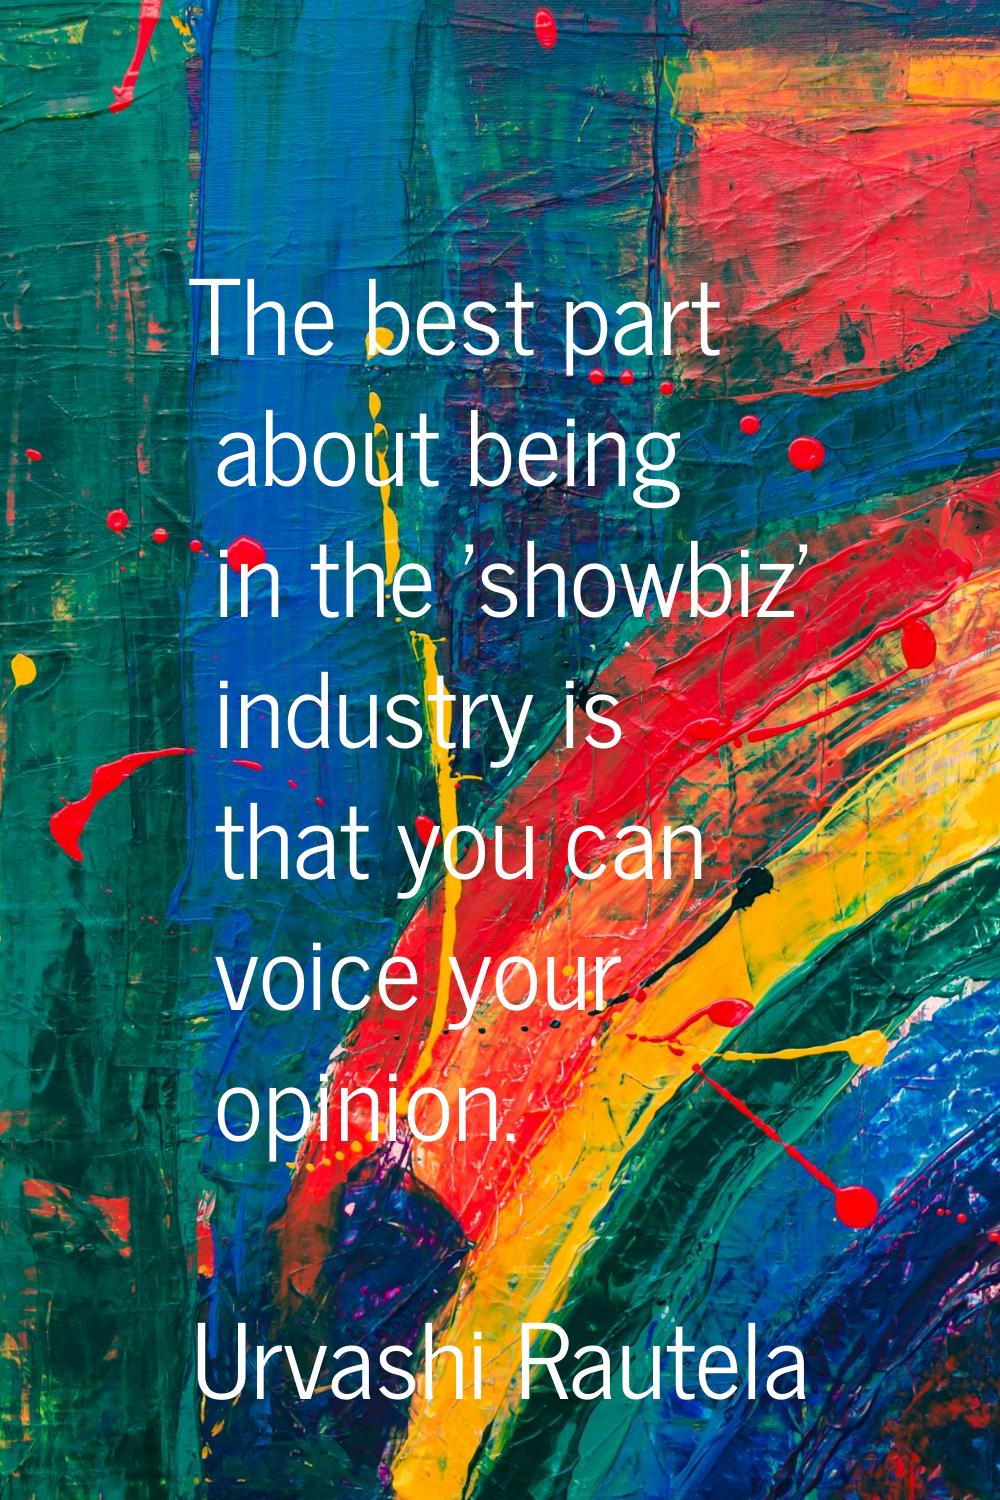 The best part about being in the 'showbiz' industry is that you can voice your opinion.